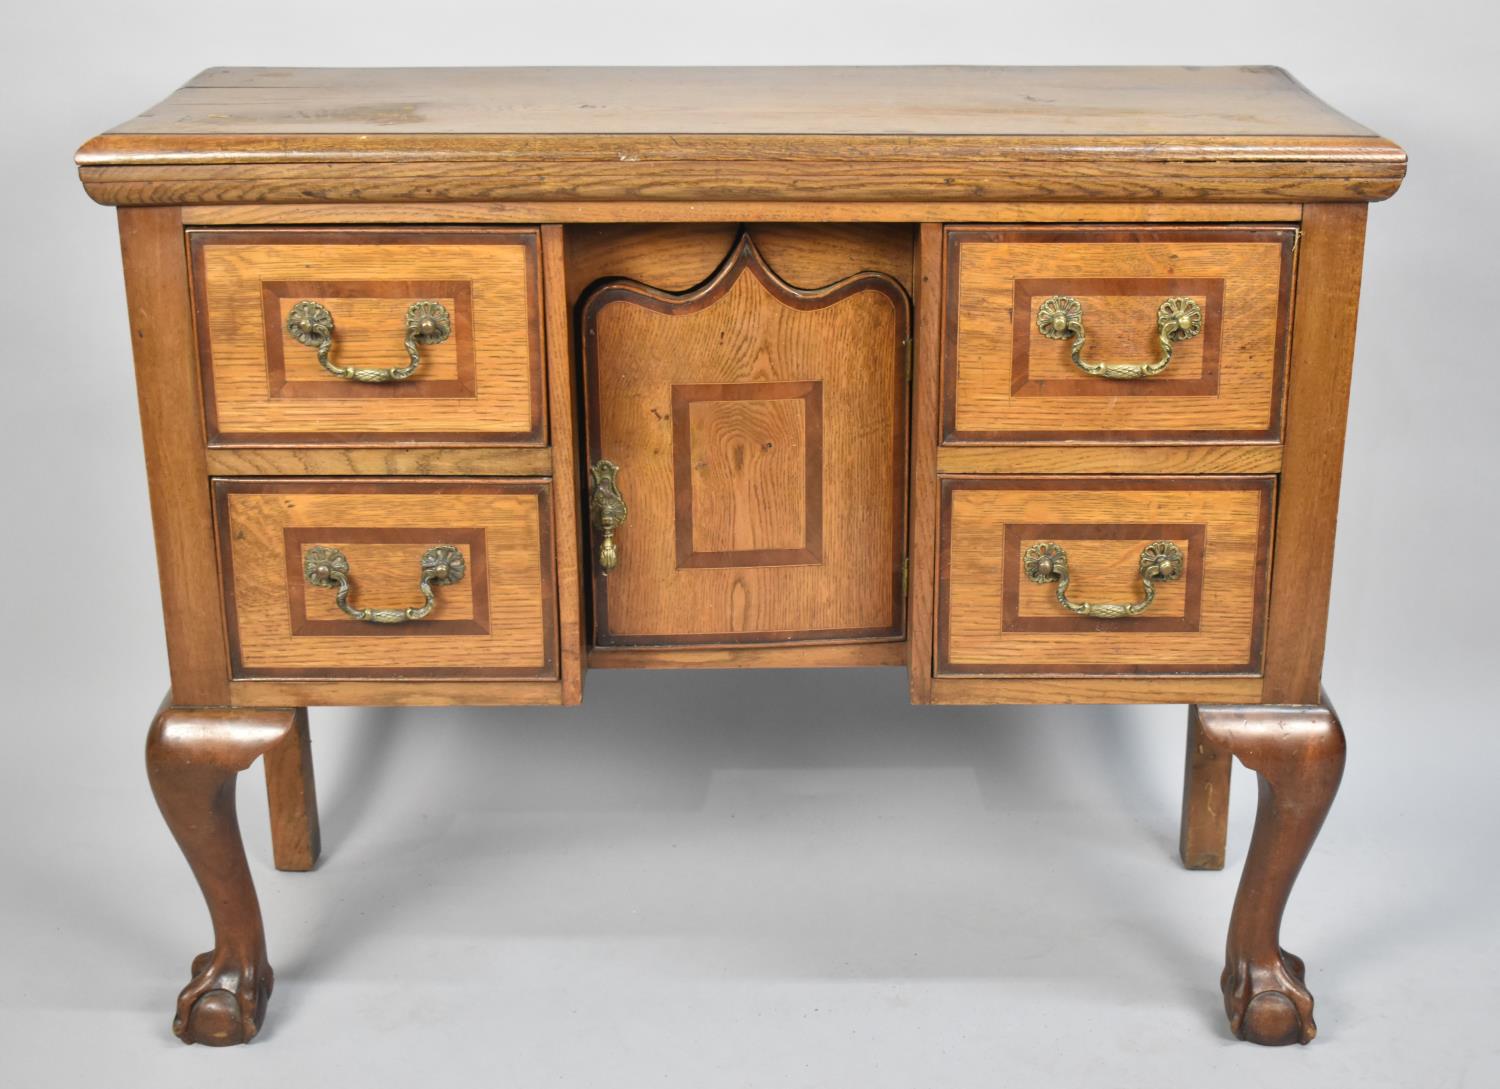 A Nice Quality Edwardian Oak Lowboy, Drawers and Cupboard Door with Mahogany Banding, Brass Drop